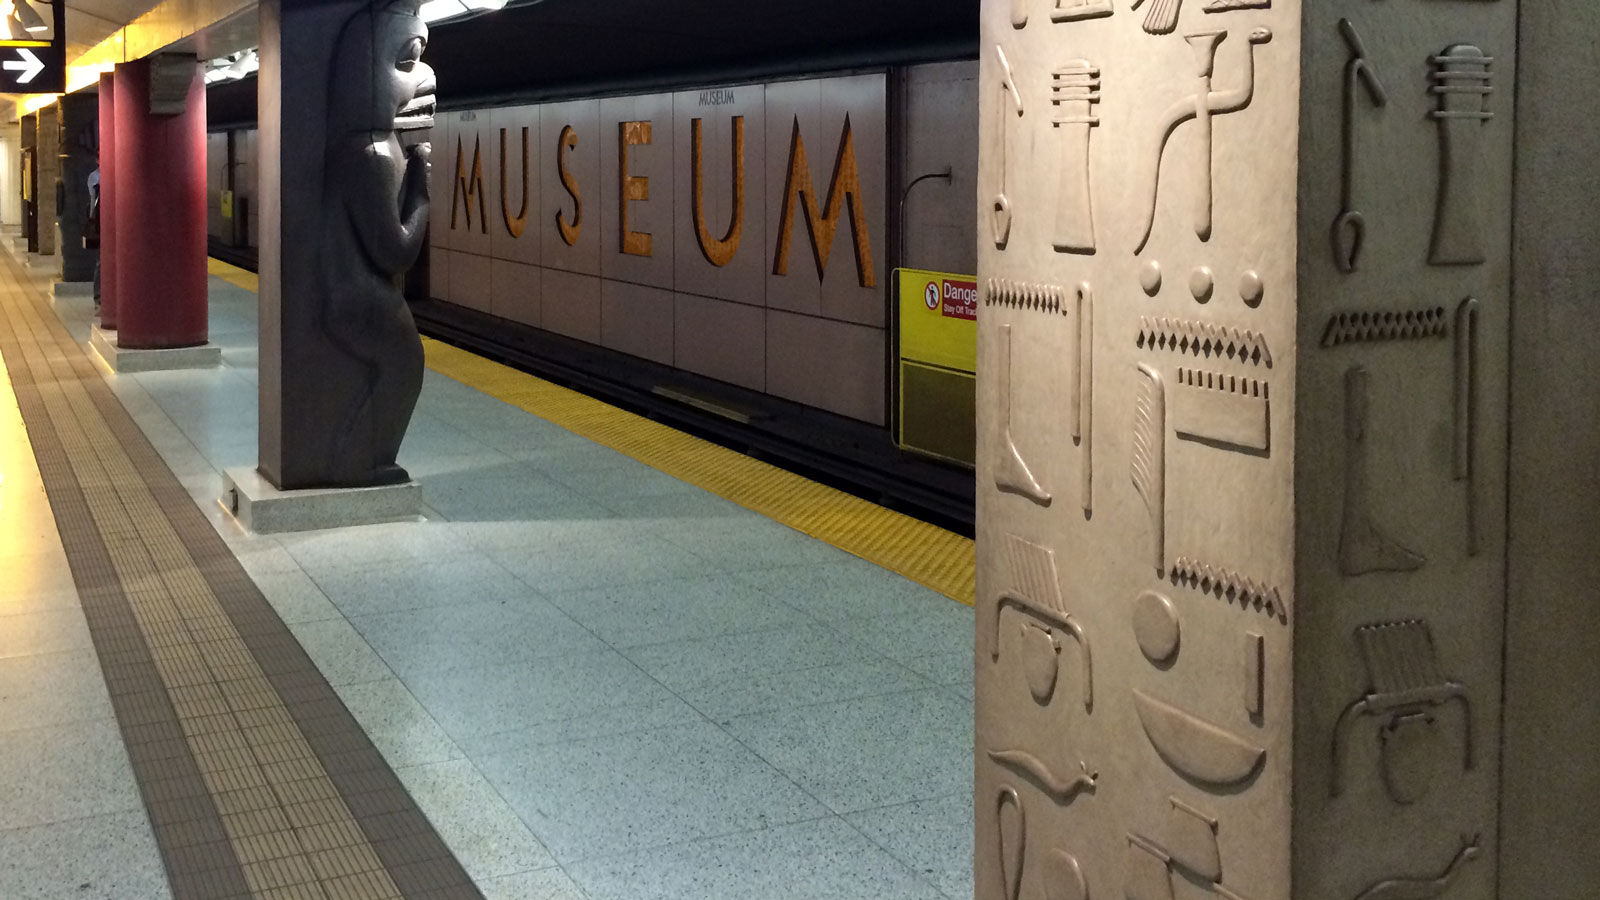 Photograph of Museum Station in Toronto showing the interesting pillars and columns.